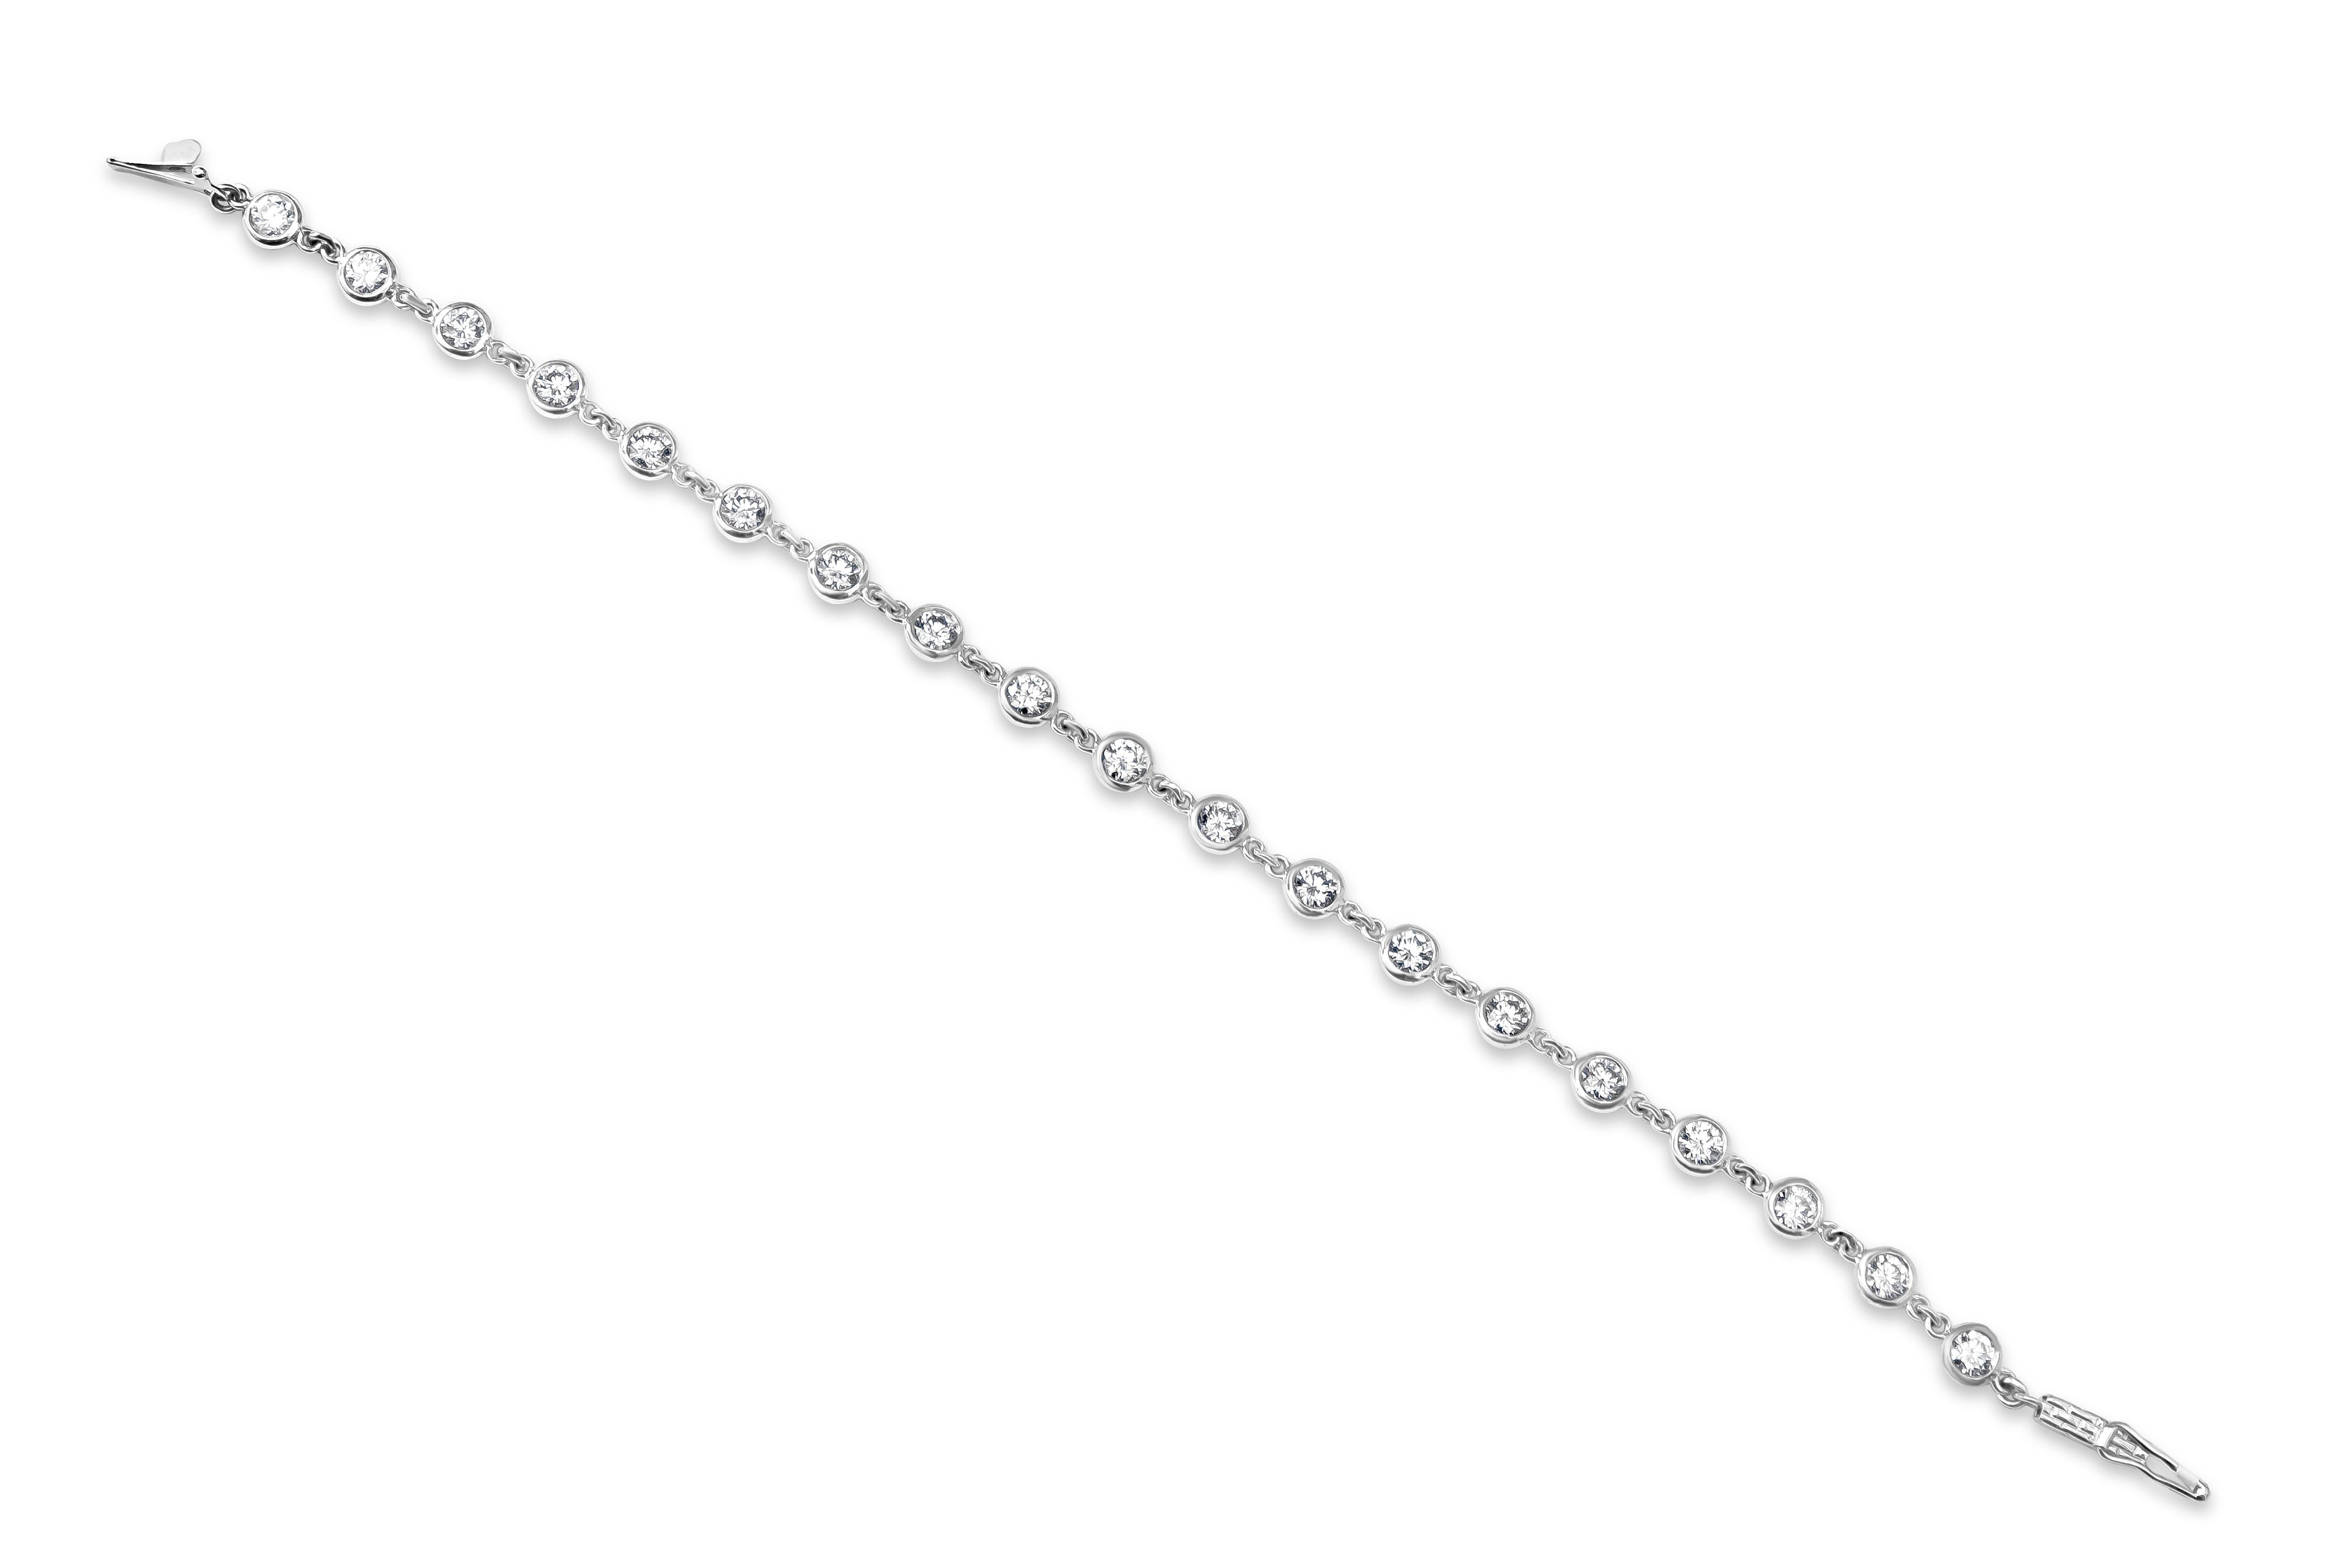 A modern bracelet showcasing round diamonds bezel set in platinum, spaced evenly on a 7 inch platinum chain. Diamonds weigh 2.87 carats total.
